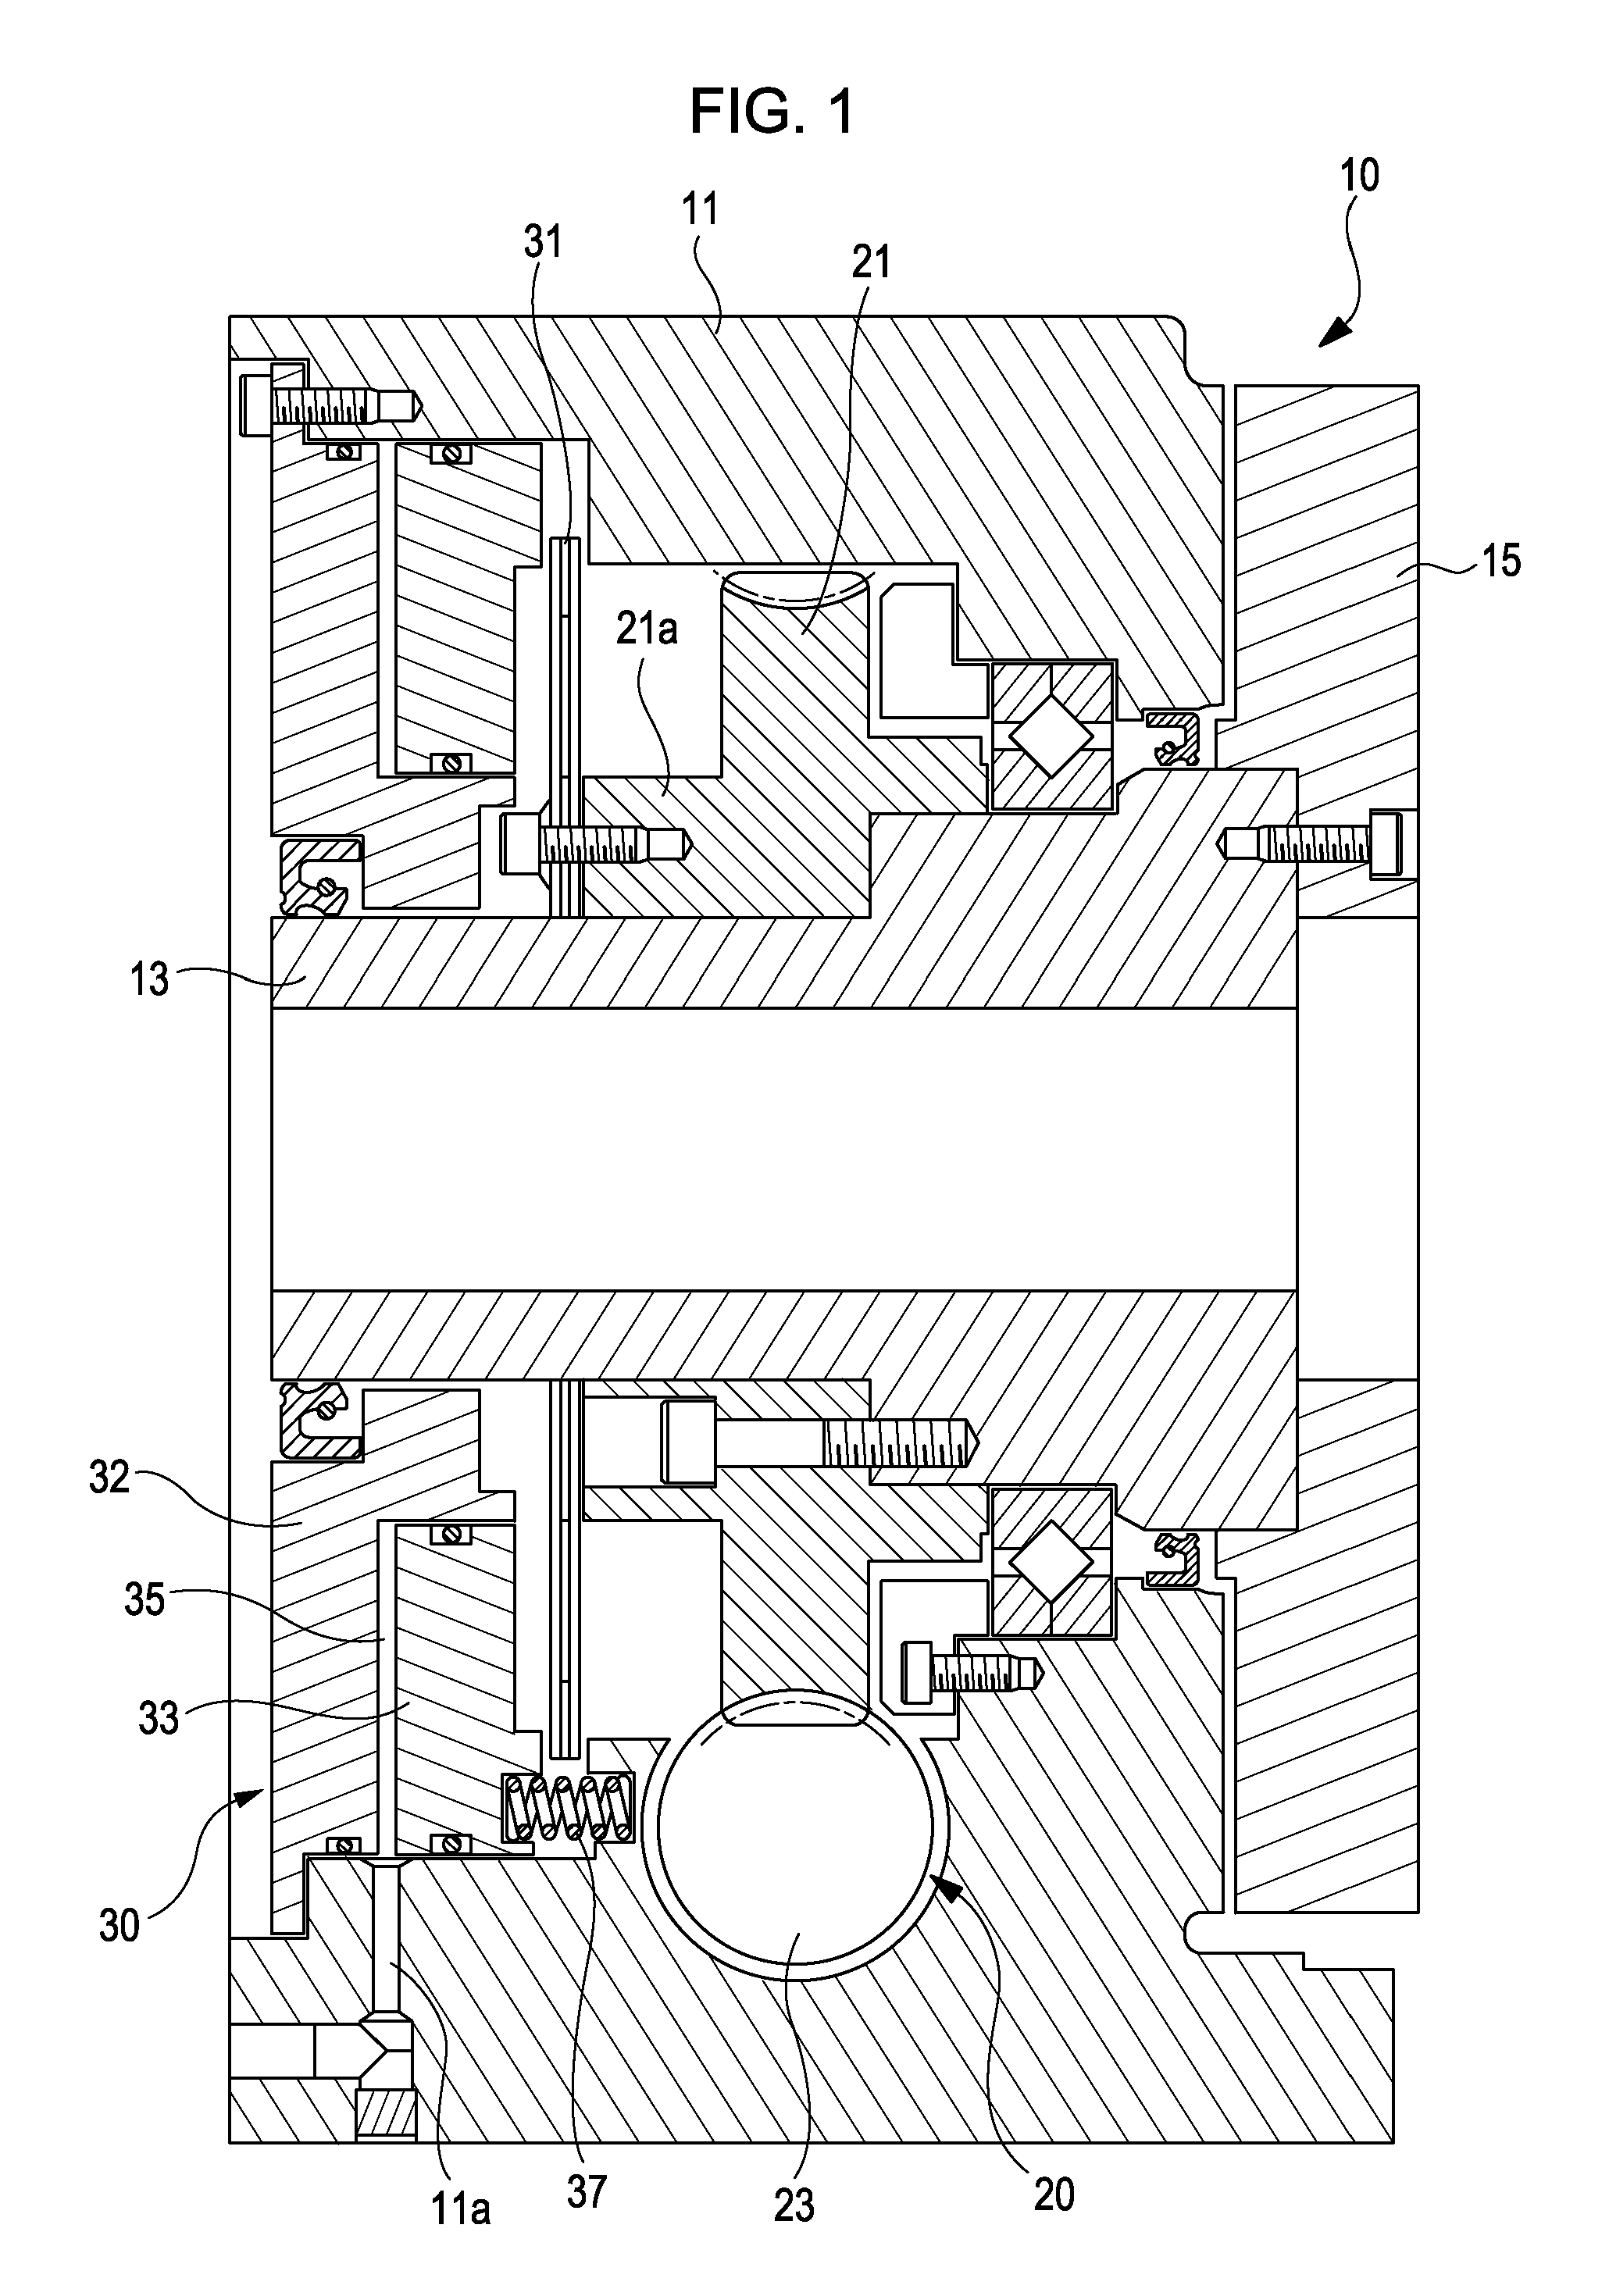 Method of controlling drive of driving motor for rotary indexing device of machine tool